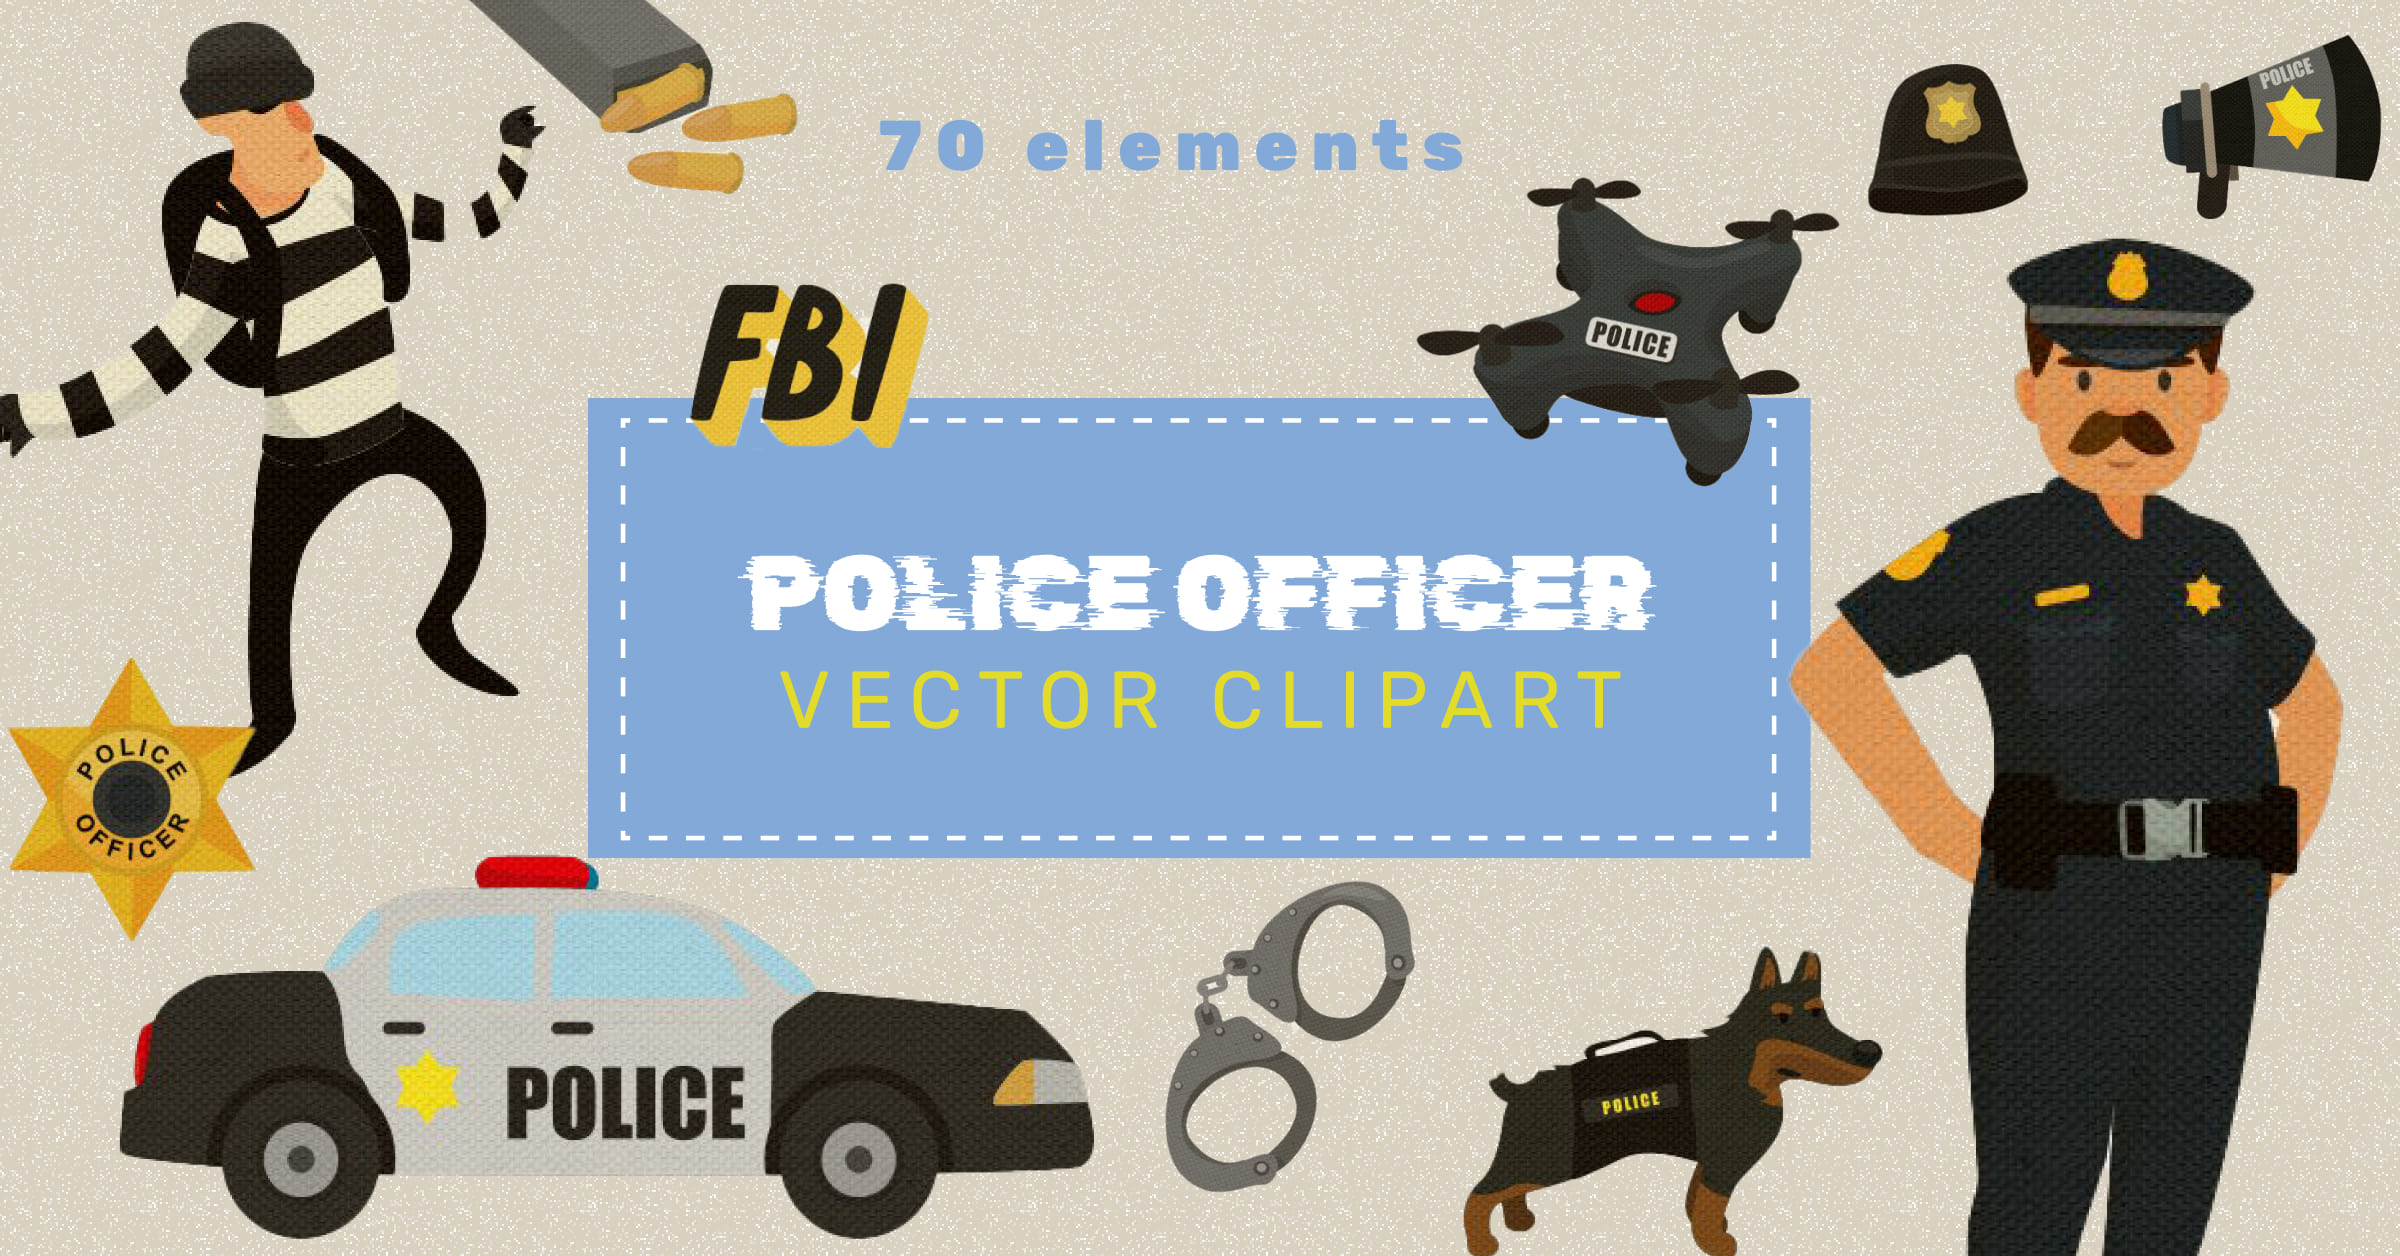 Police Officer Vector Clipart and Seamless Pattern - Facebook.